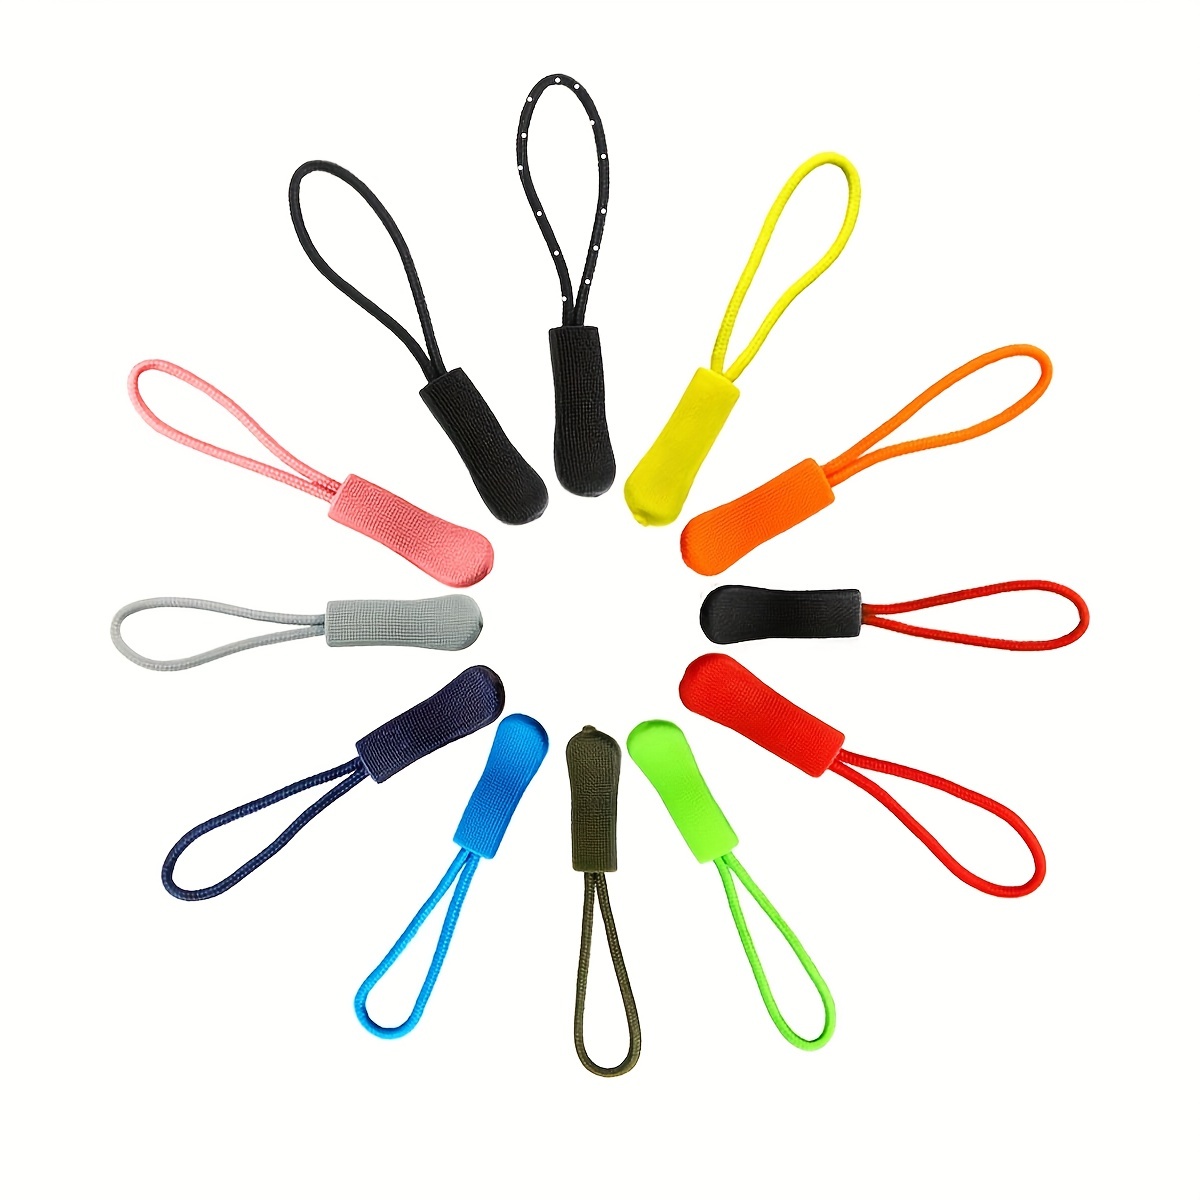 4pcs Premium Nylon Zipper Pulls Cord Rope End Colorful Zipper Pulls for  Backpack Luggage and Jackets Zipper Replacement Tote Bag Zipper Pull 